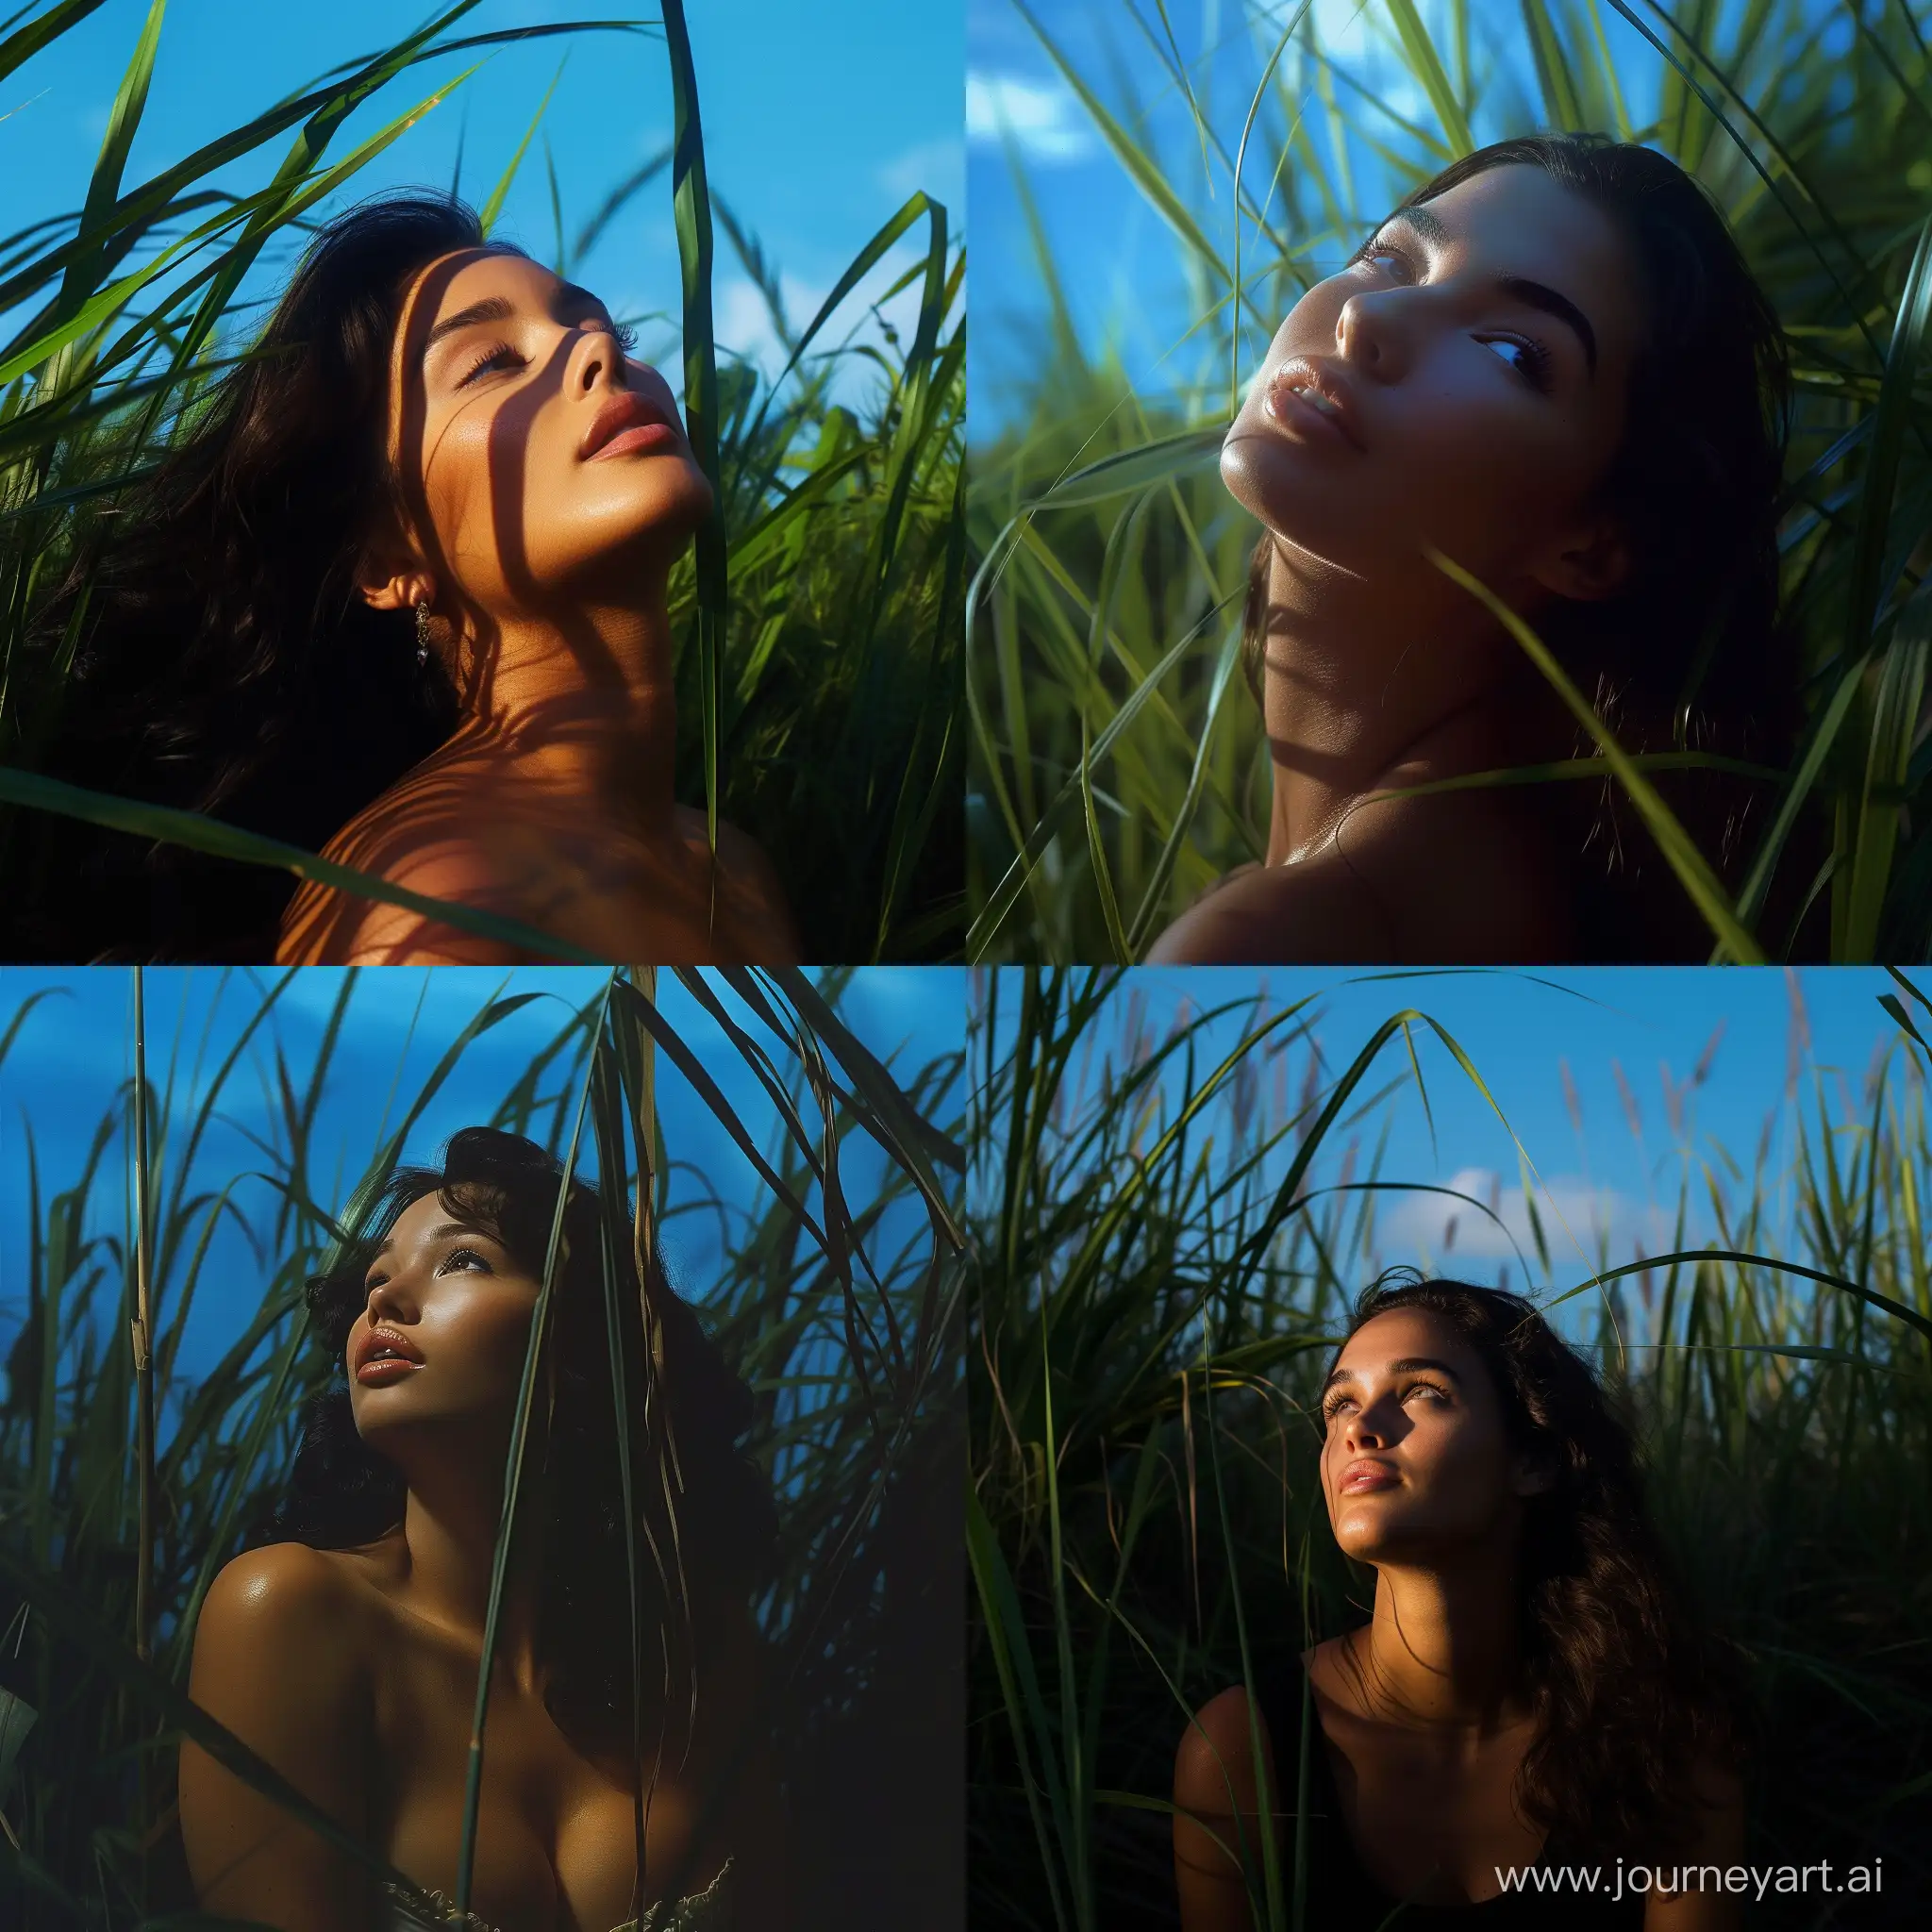 ((hour glass physique)), brunette model that dose not exist in real life, dappled light, looking up towards the blue sky, in tropical grassland  